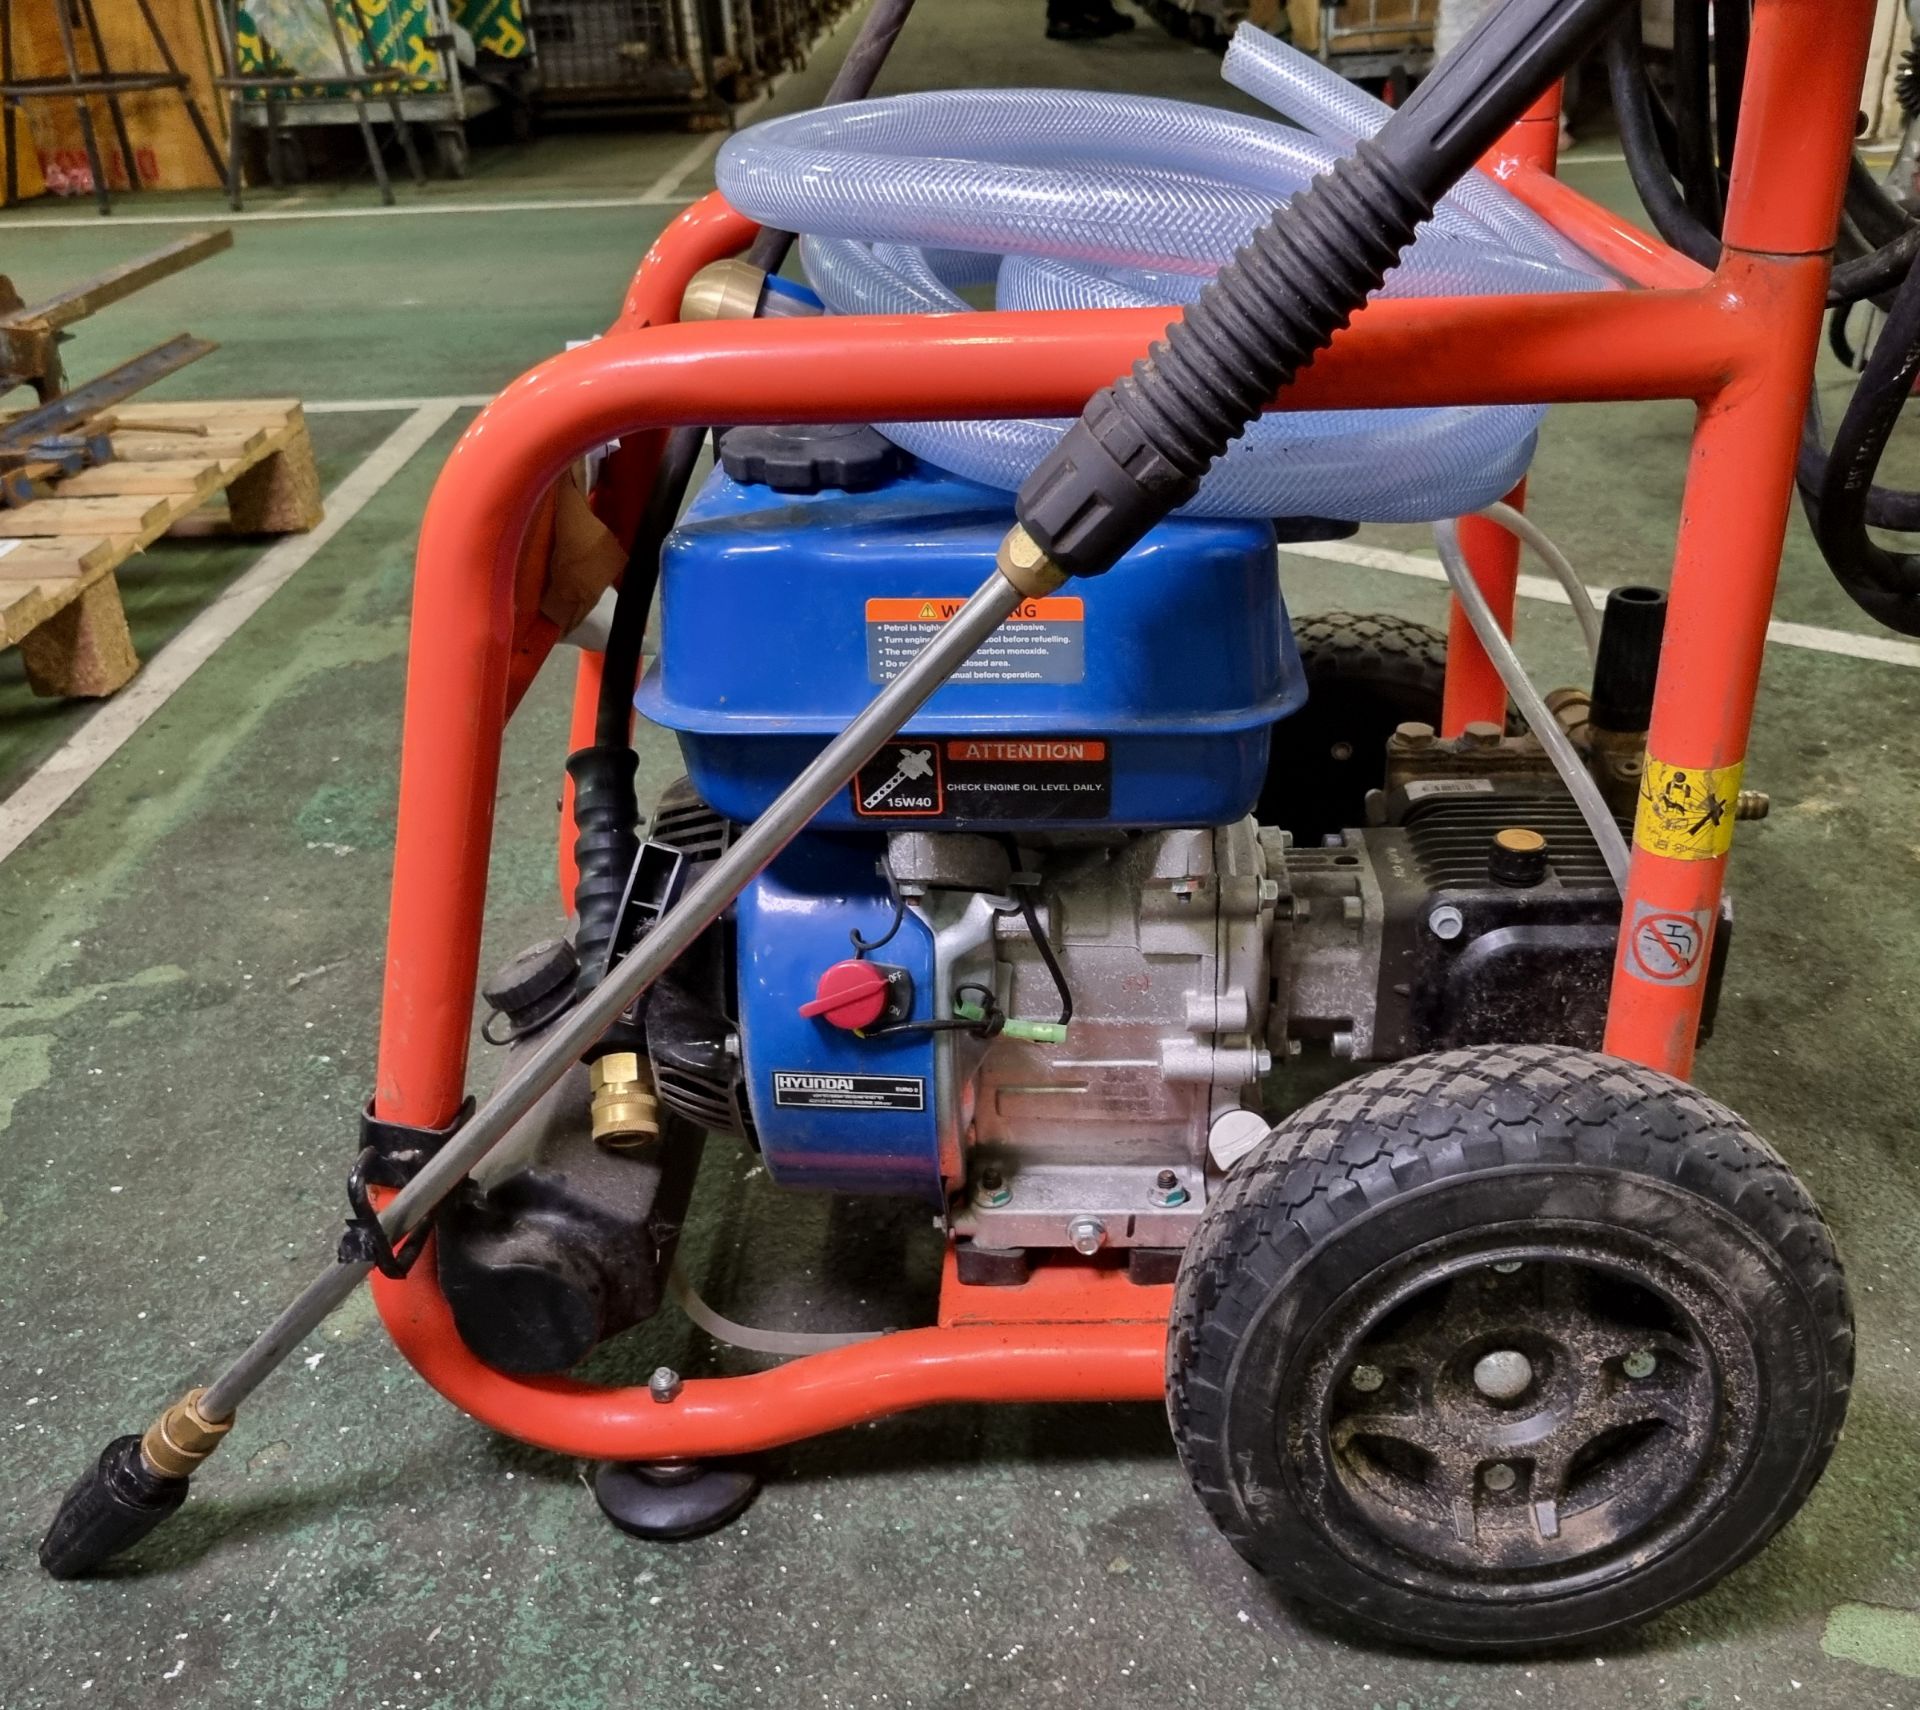 Position One Power Equipment commercial petrol pressure washer with Hyundai engine - details in desc - Image 5 of 8